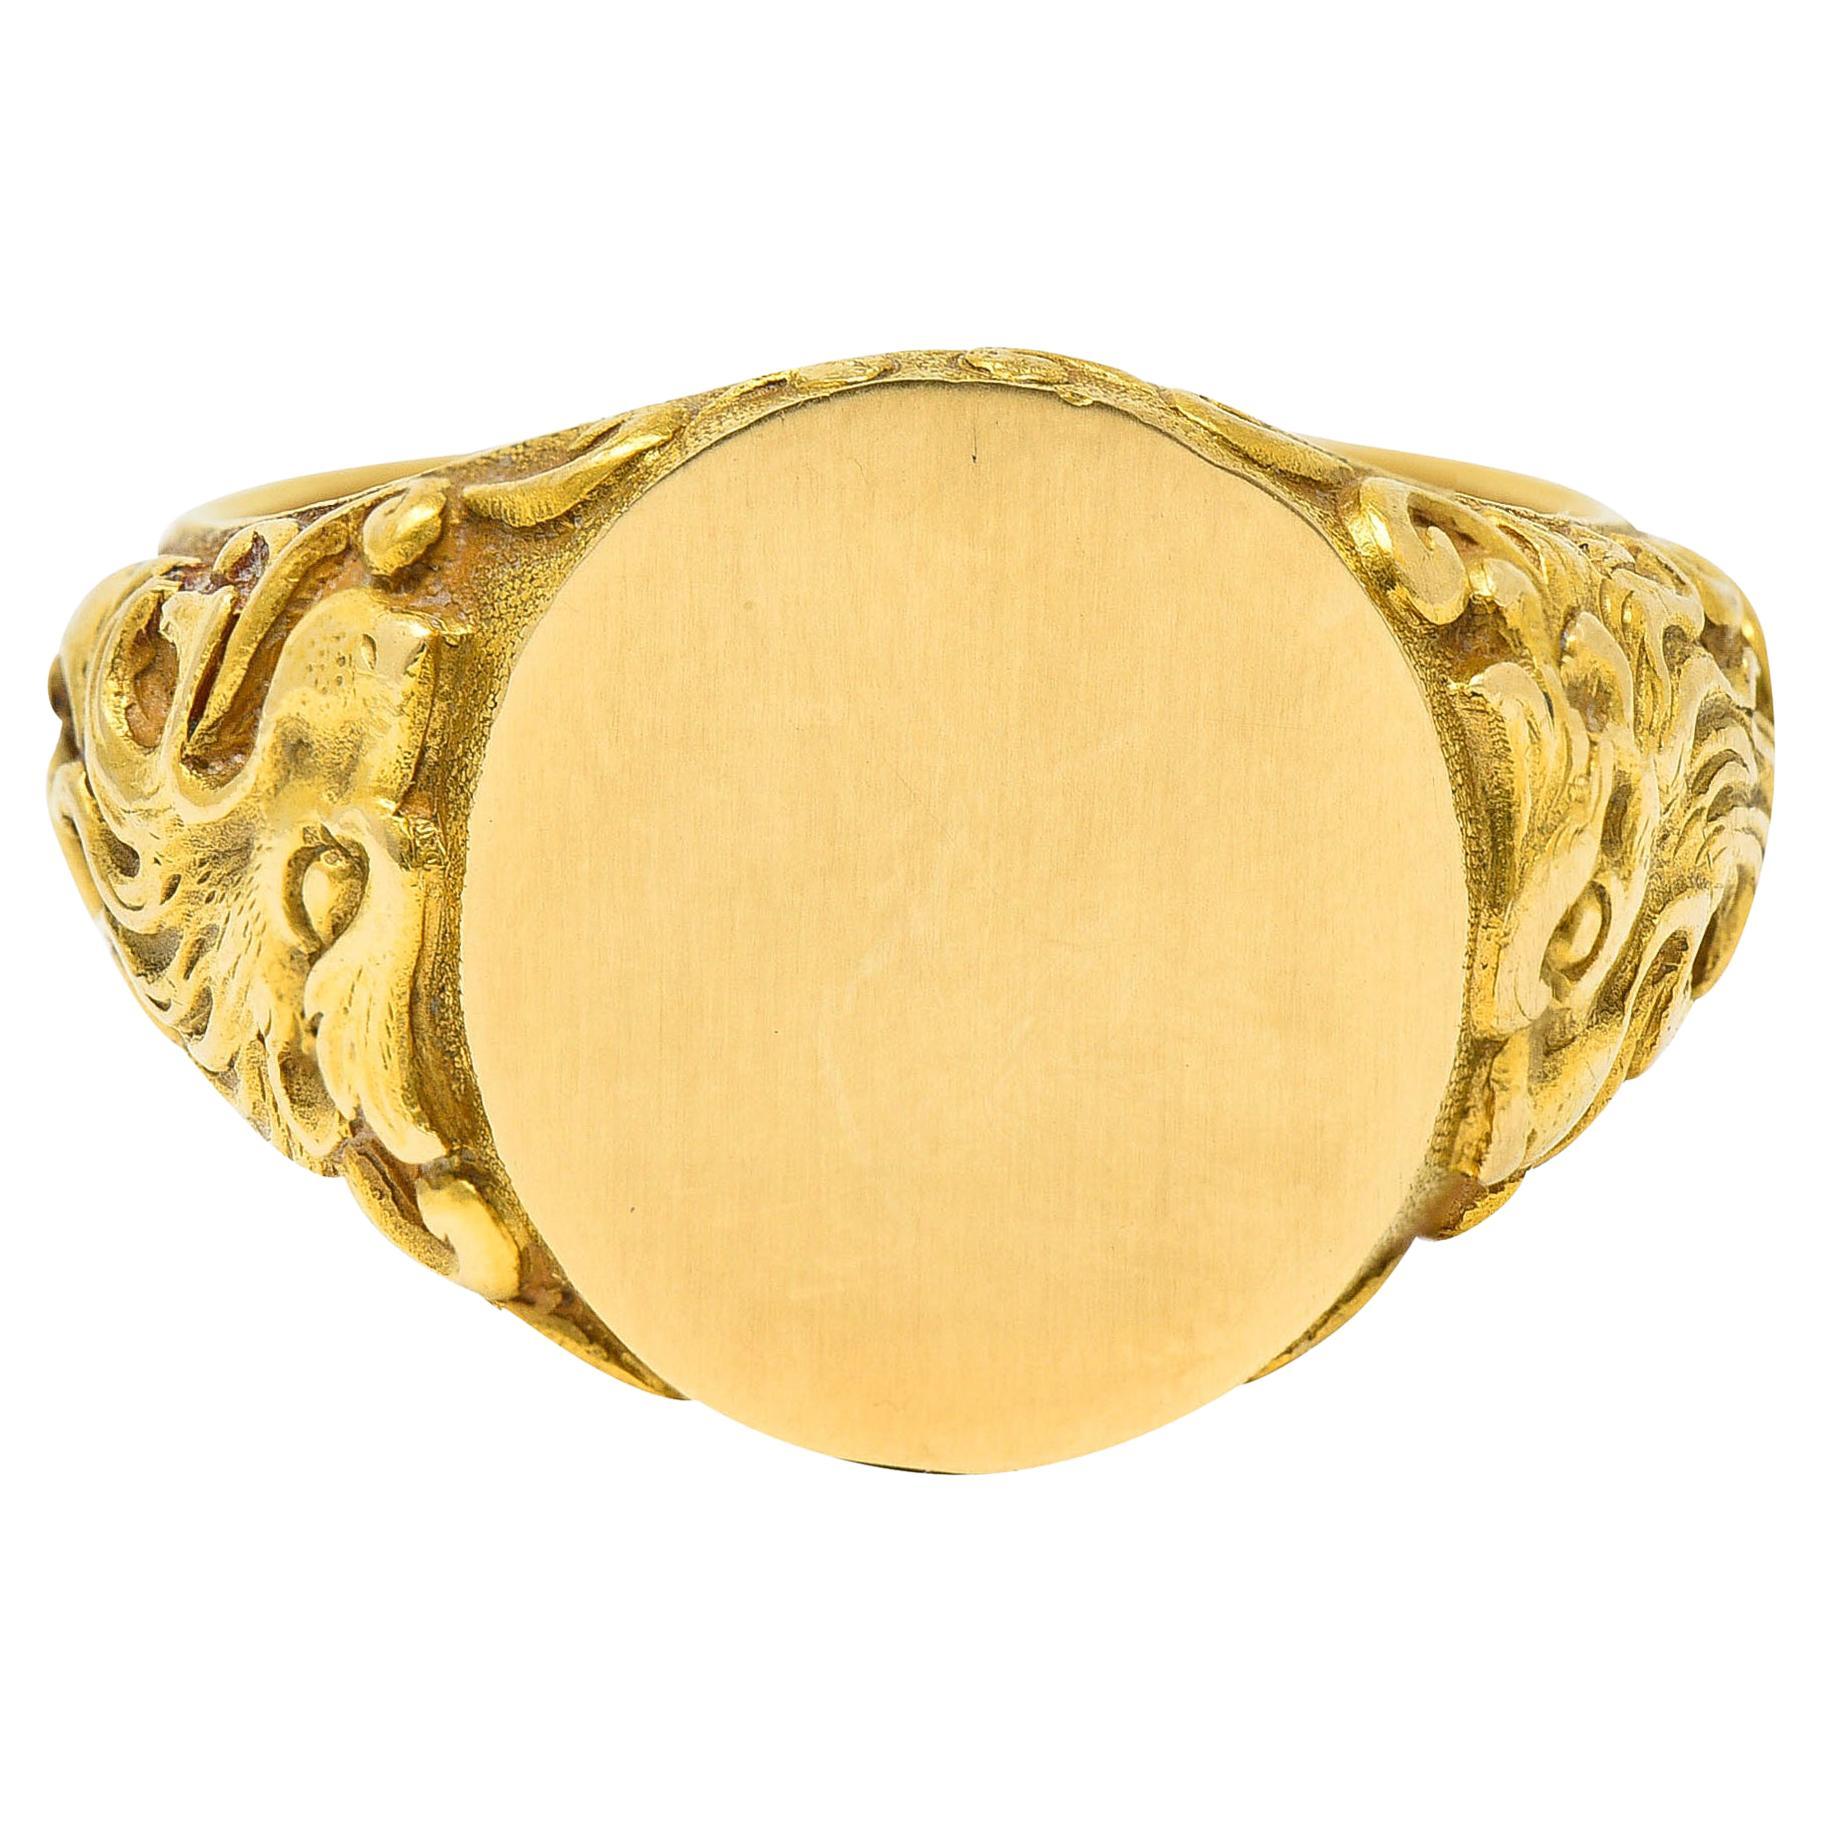 Signet ring has an oval signet face measuring approximately 14.0 x 13.0 mm

With a finely brushed finish and highly rendered whiplash shoulders

Completed by a roaring lion motif

Tested as 18 karat gold

Fully signed Tiffany & Co. with an